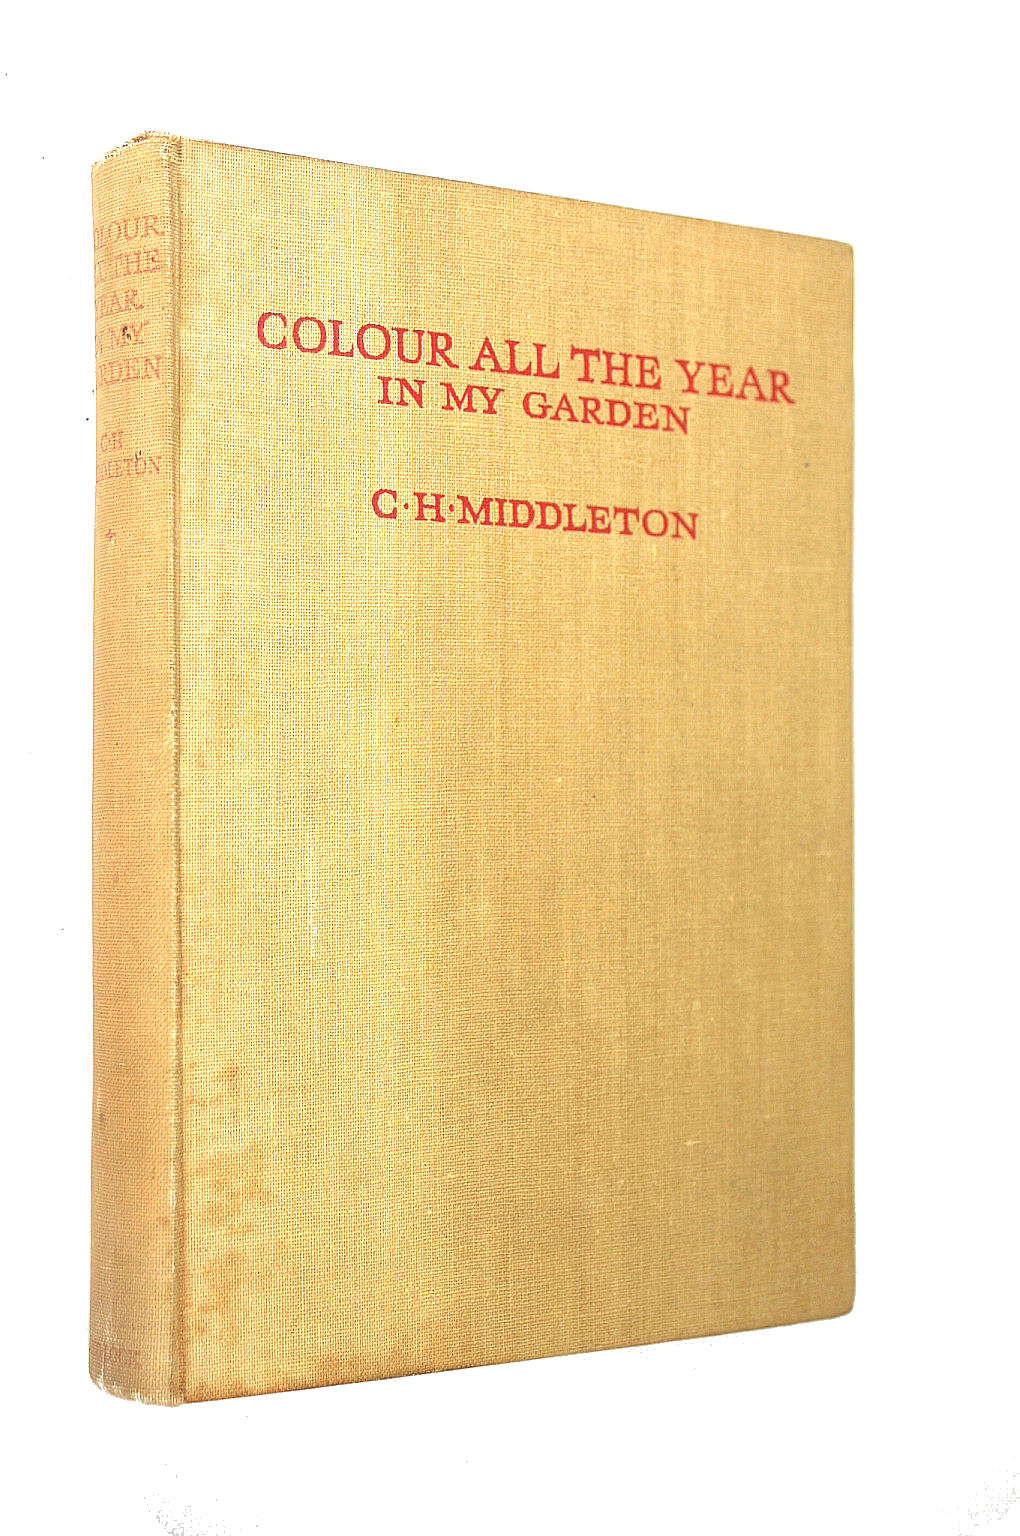 C. H. MIDDLETON - Colour All The Year In My Garden